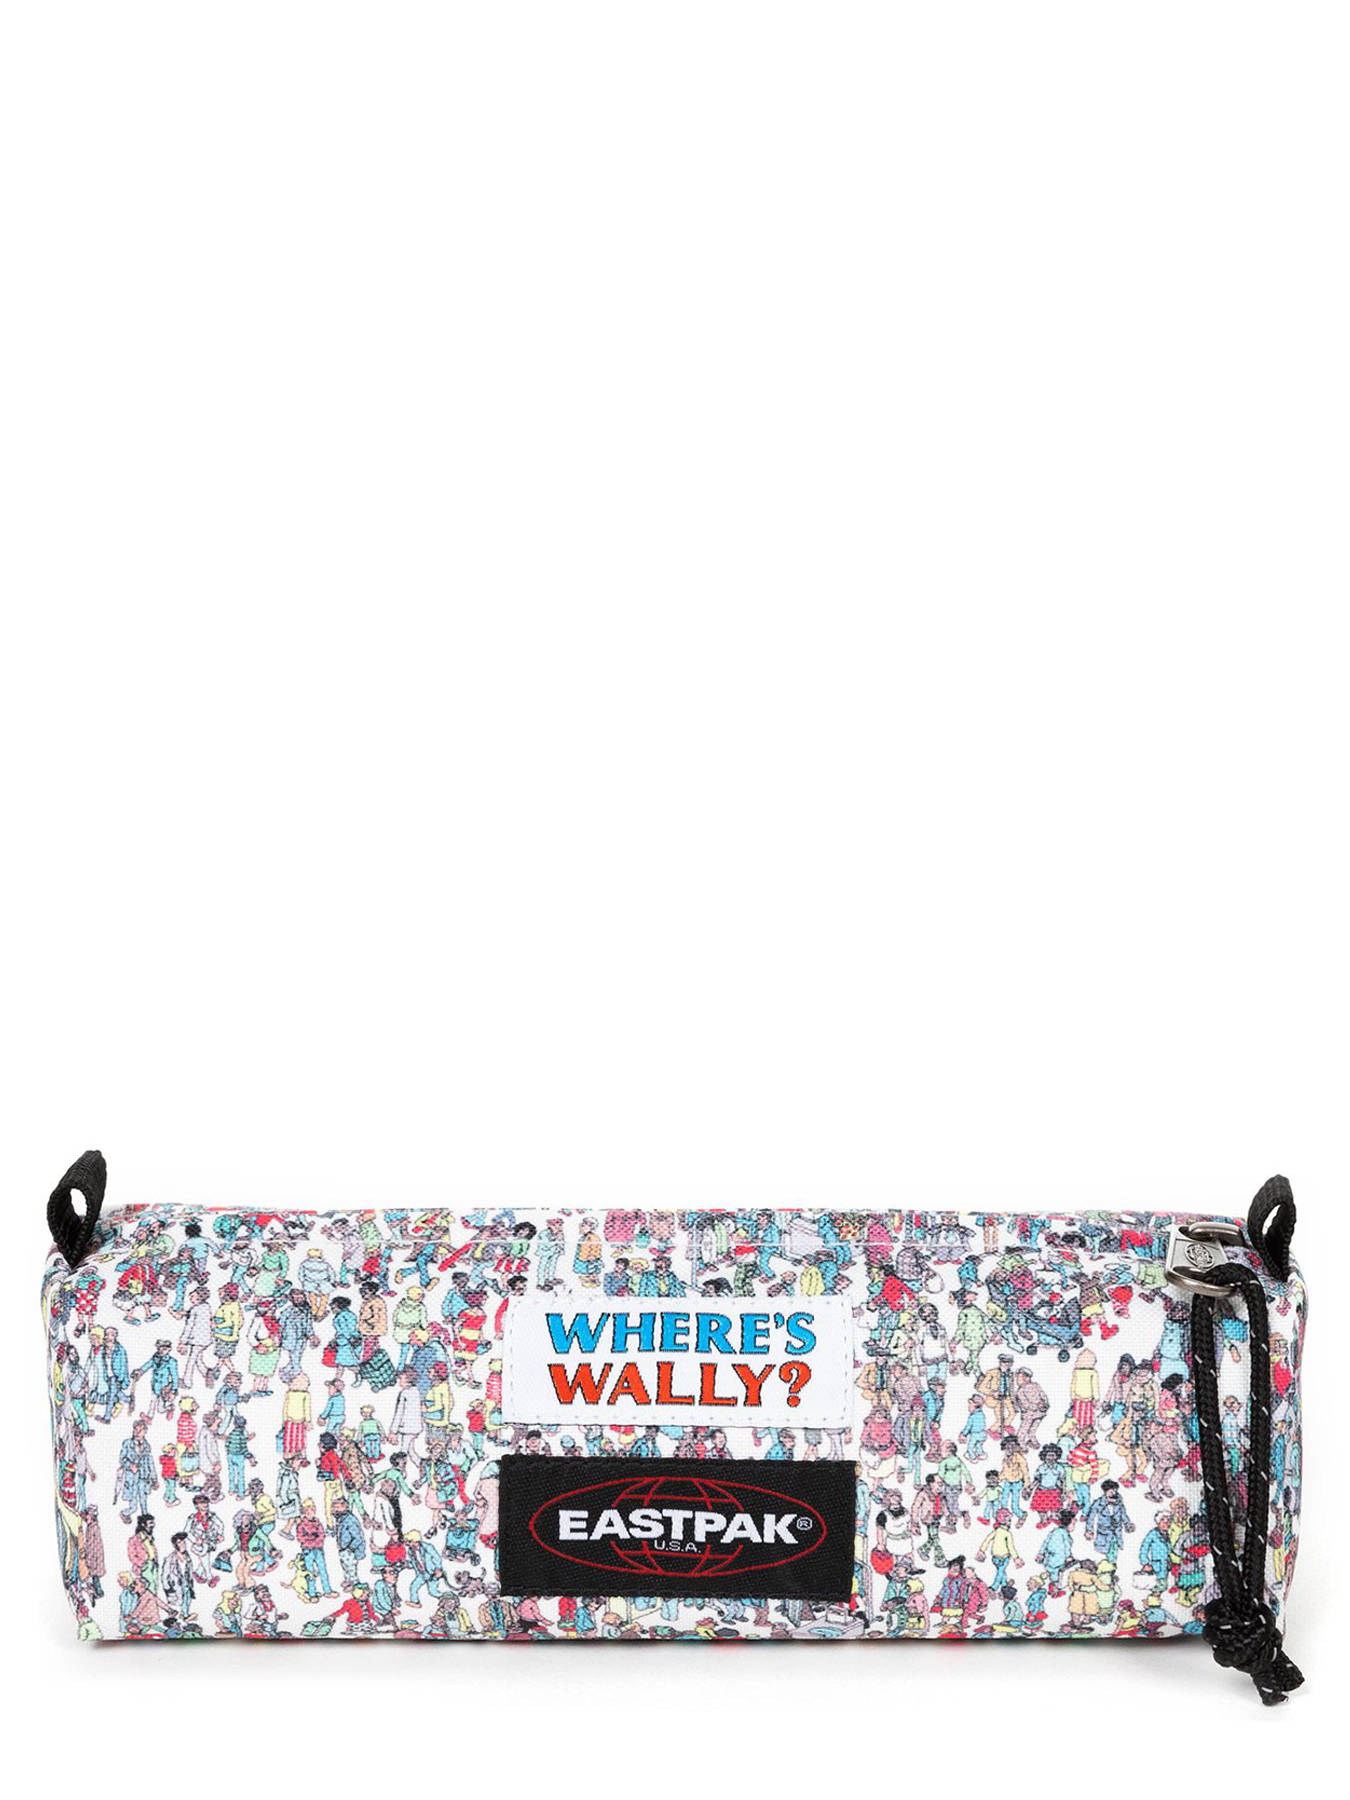 Trousse Eastpak Where is wally BENCHMARK sur